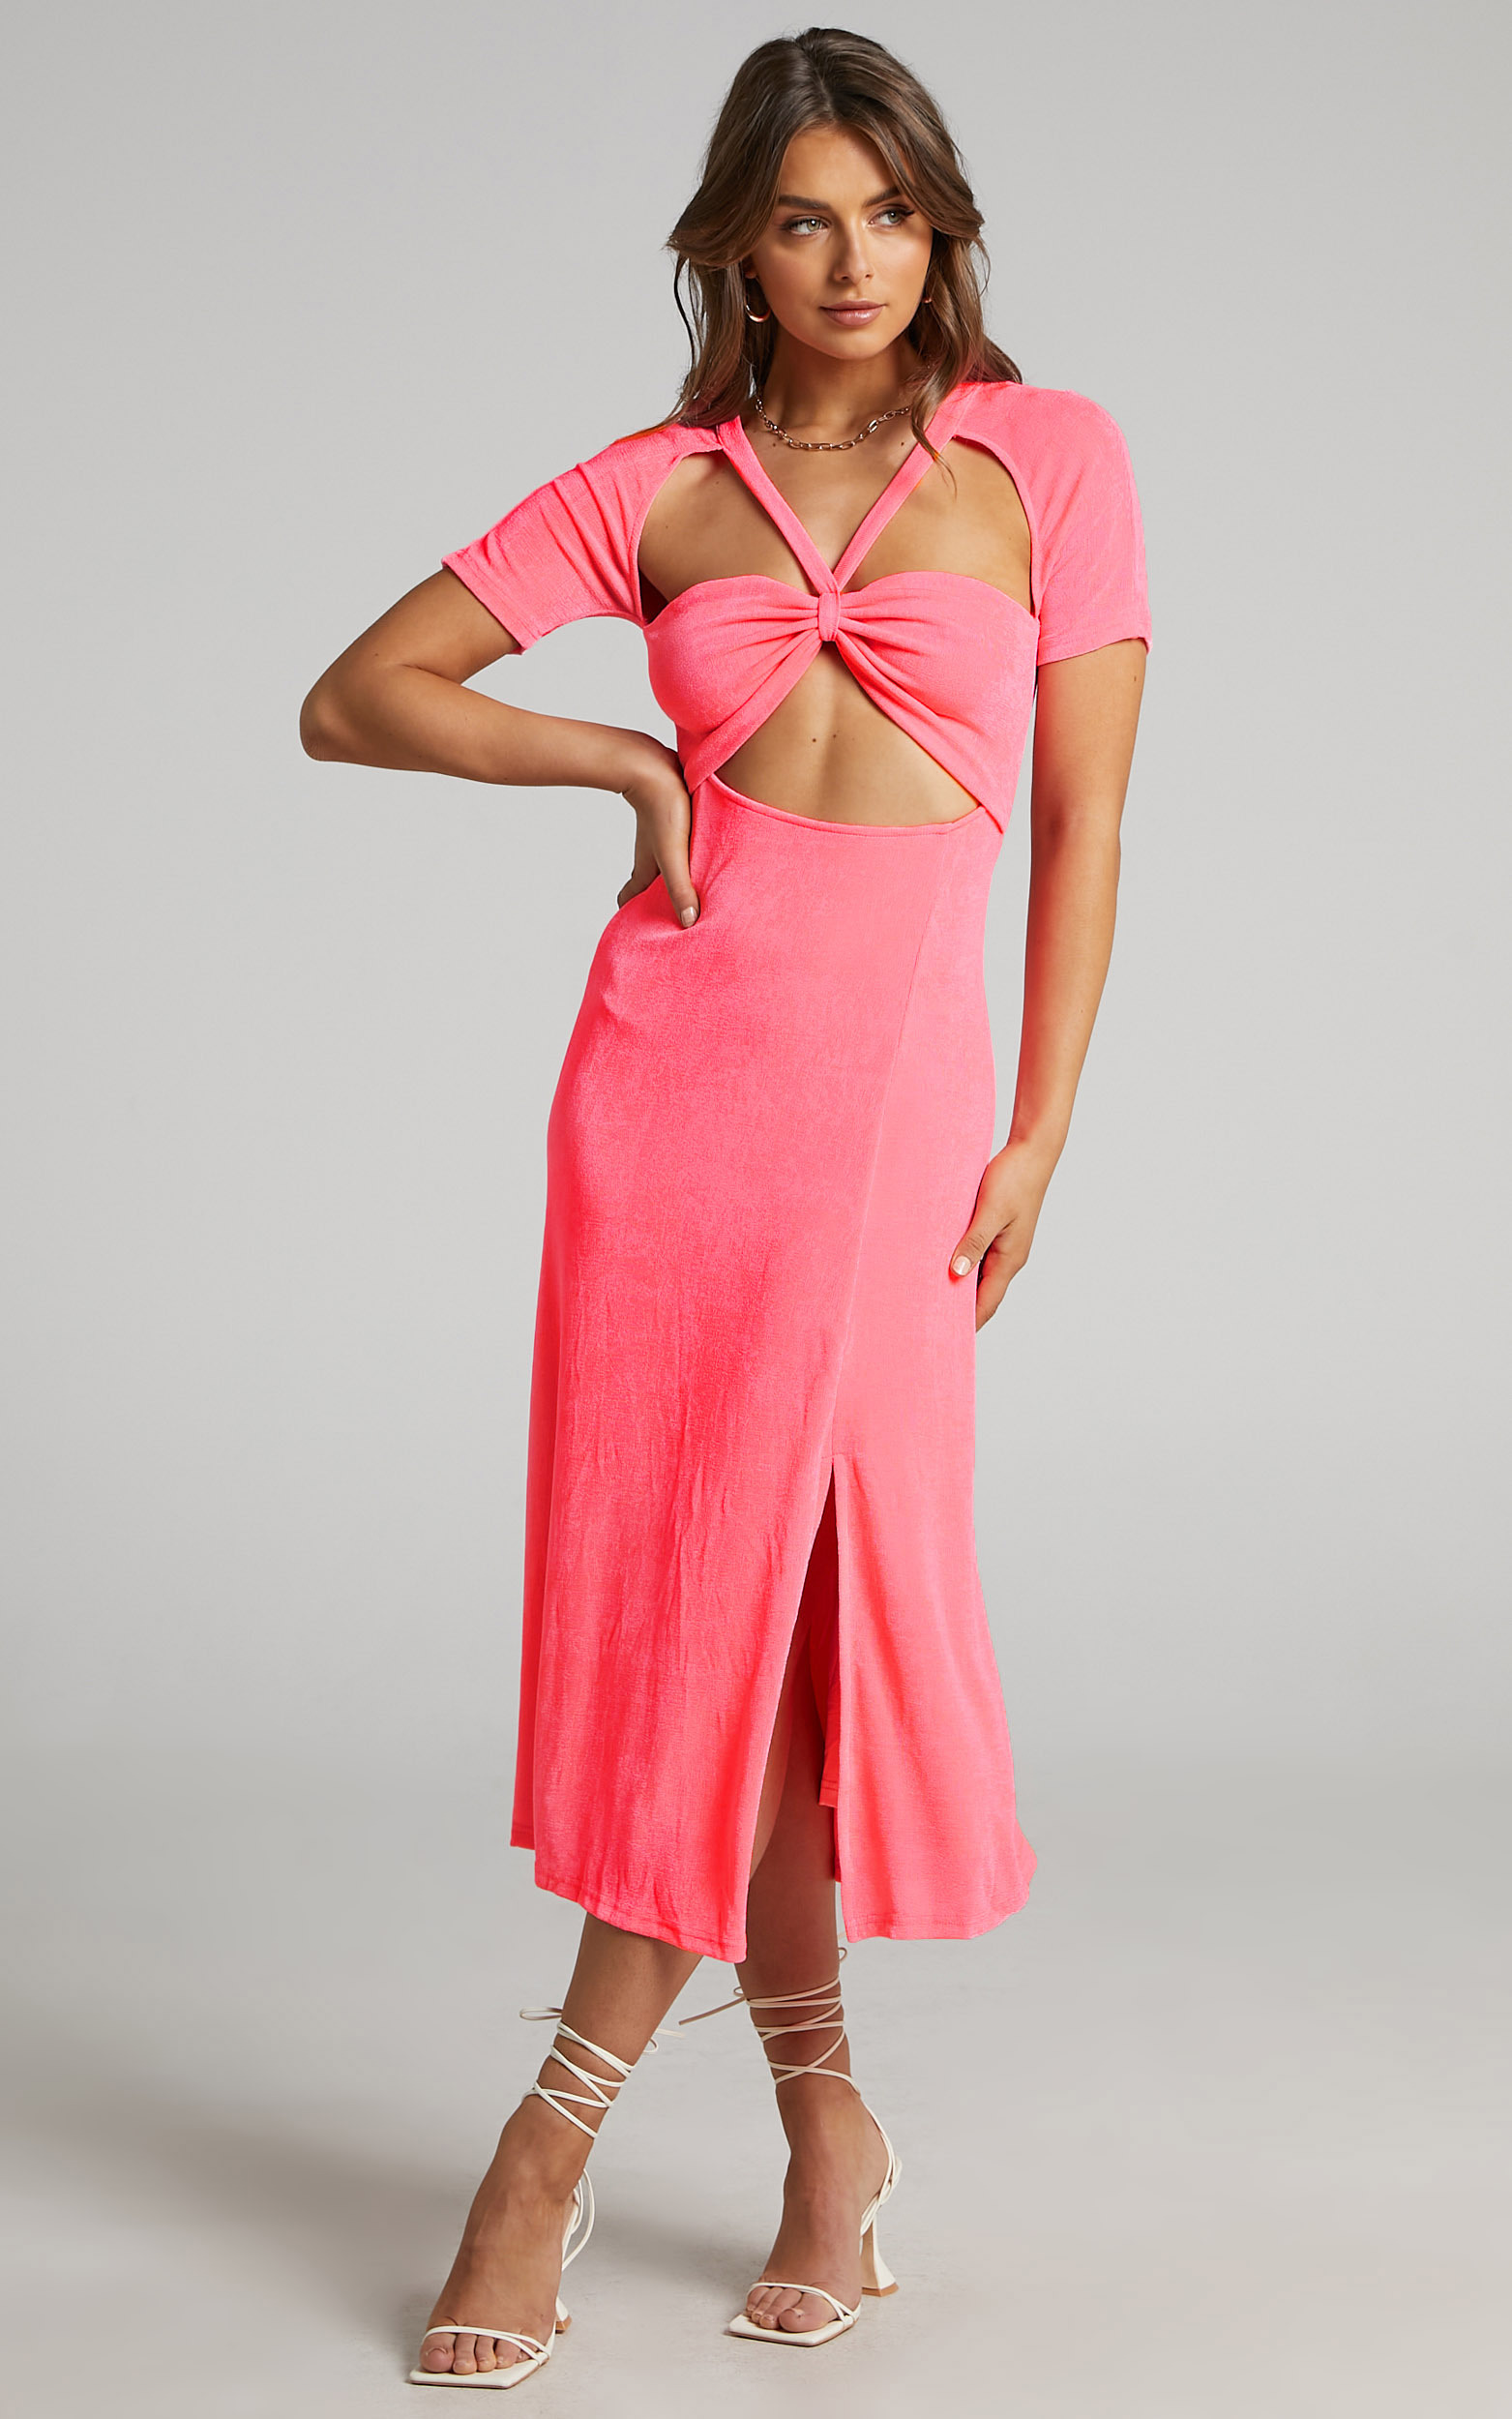 Lyanna Cut Out Midi Dress in Neon Pink - 06, PNK2, hi-res image number null